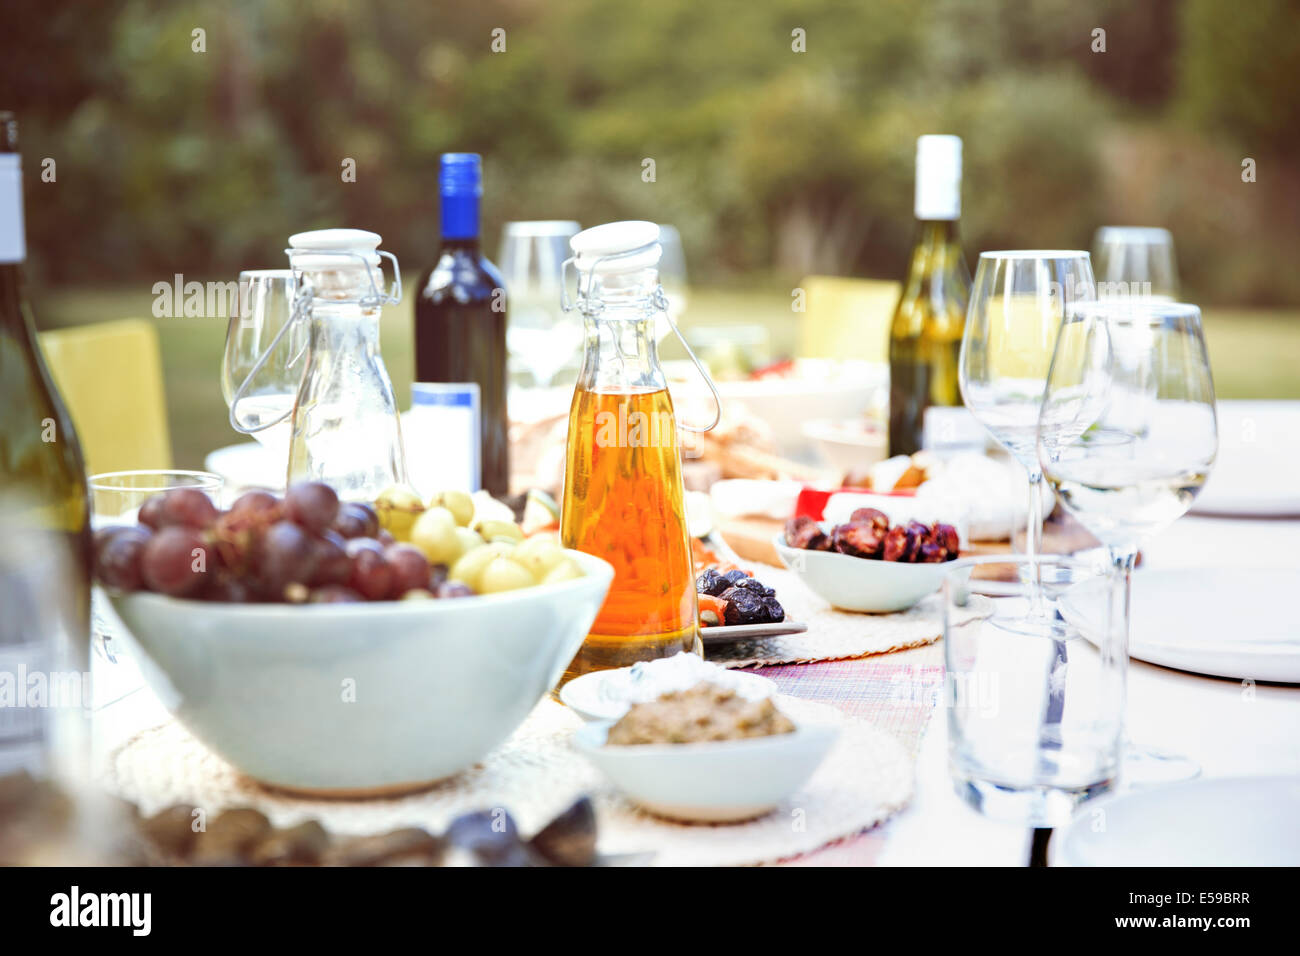 Set table at party outdoors Stock Photo